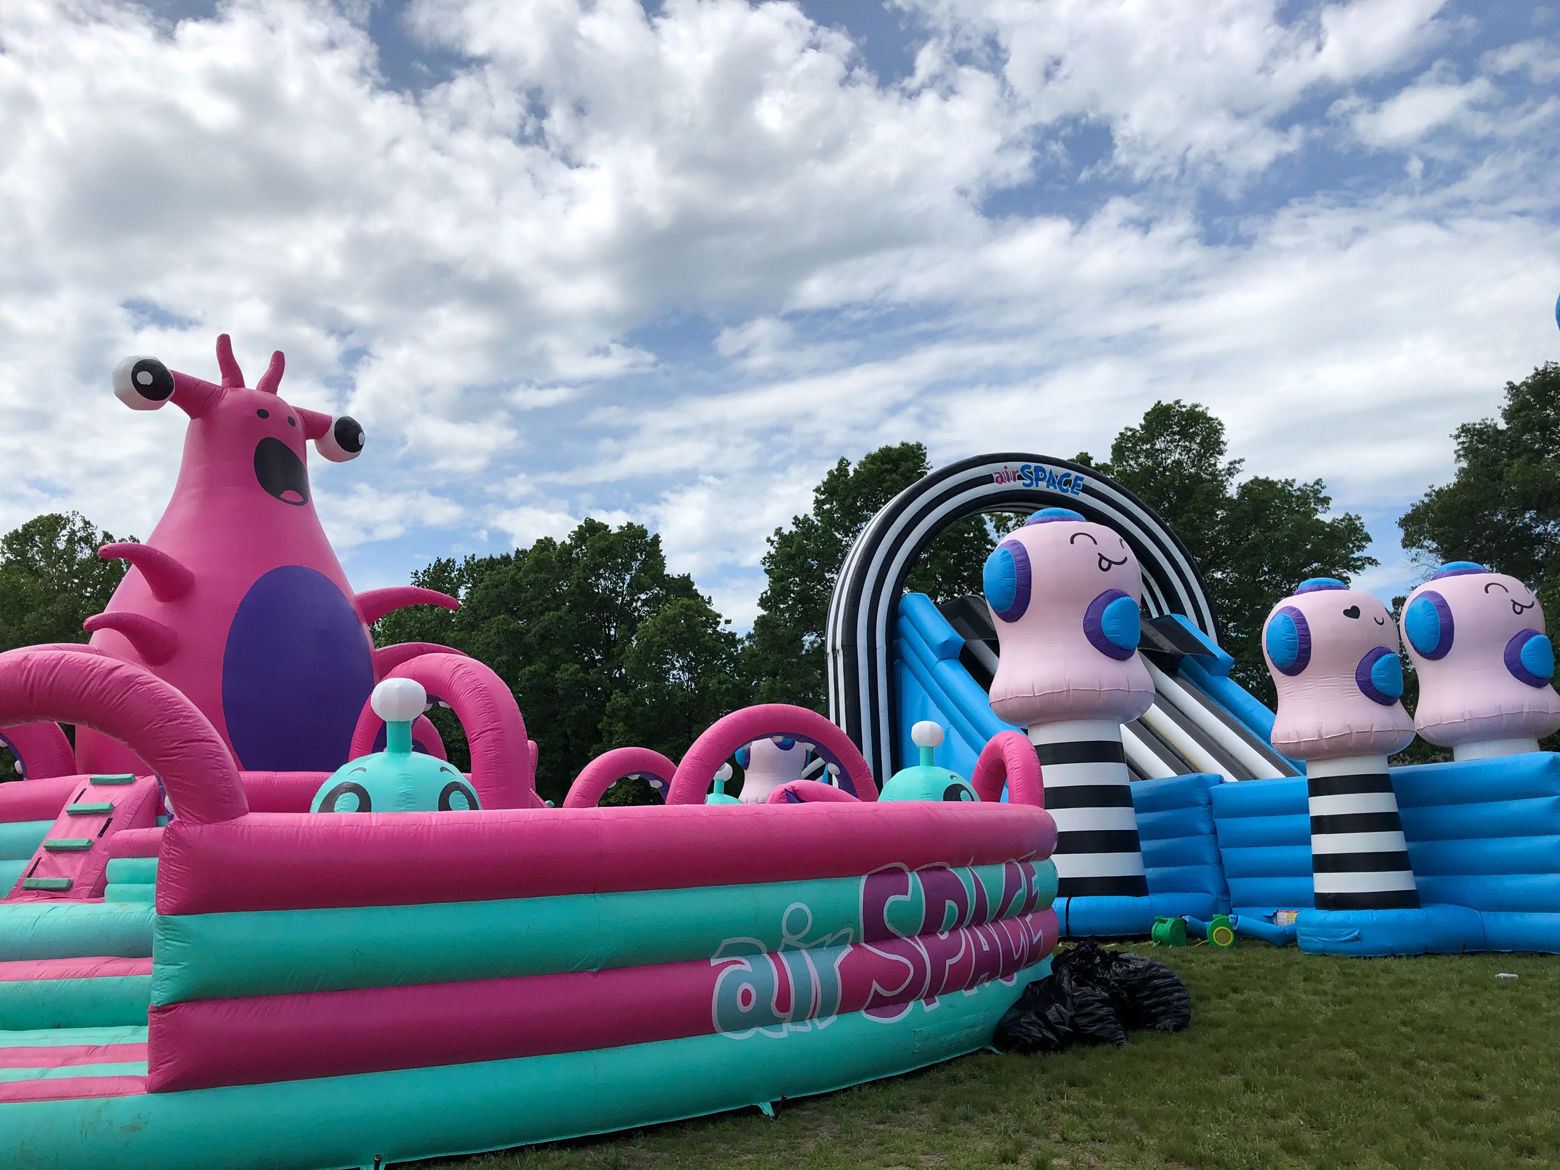 Next thing you knew, an entire complex of bouncy experience sprung to life. (WTOP/Kristi King)